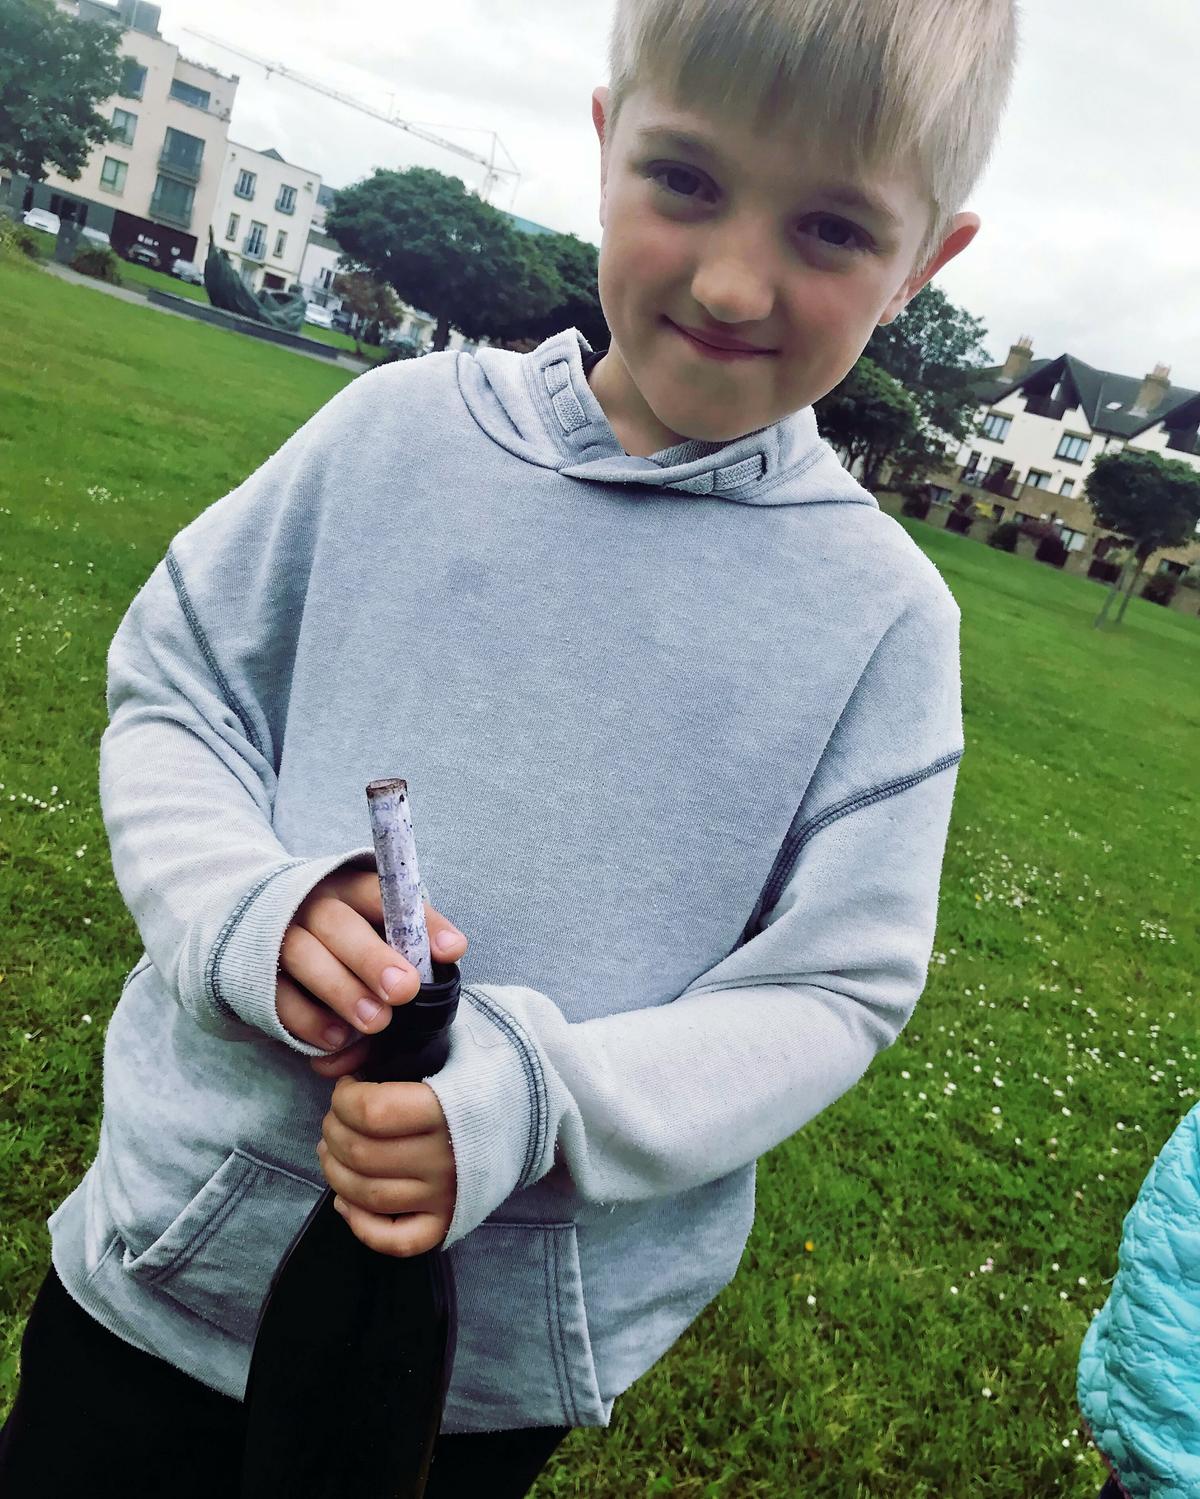 Timur Timondegus, 8, with the mysterious letter in a bottle dated from 2001 that washed up on a beach in Ireland. (©SWNS)